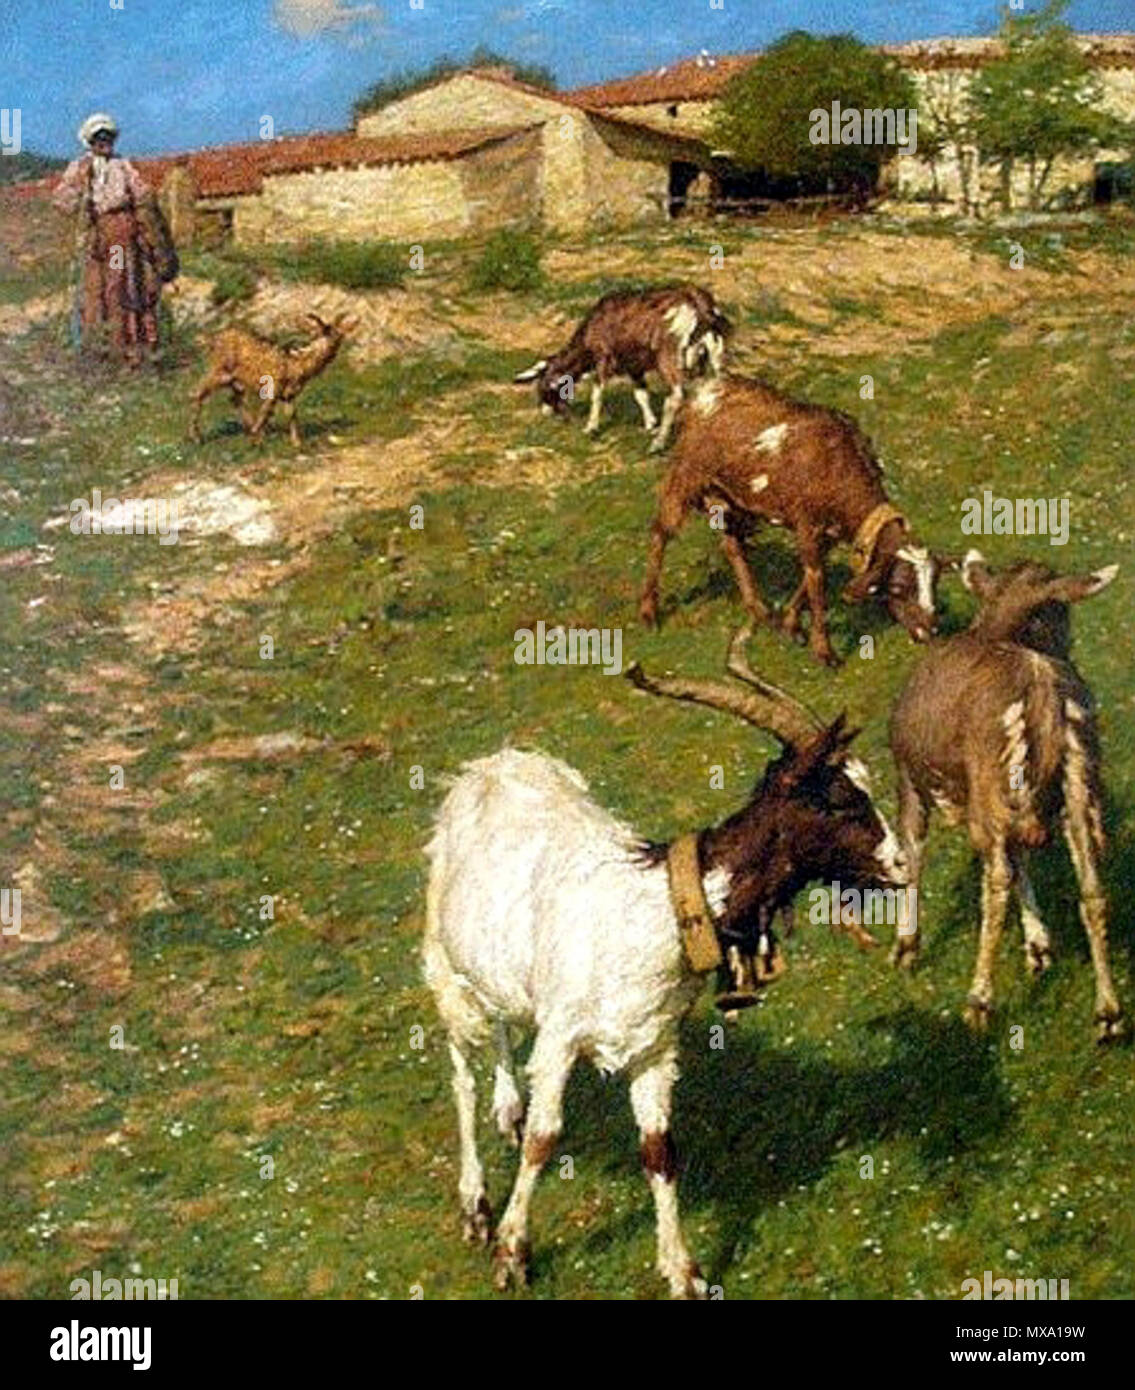 . Provencal Farm . Unknown date.    Henry Herbert La Thangue  (1859–1929)     Alternative names Henry Herbert LaThangue; Henry La Thangue; Henry Herbert la Thangue; Henry Herbert Lathangue; La Thangue  Description English painter Realist painter and associated with the Newlyn School  Date of birth/death 19 September 1859 21 December 1929  Location of birth/death London London  Work location Bretagne, London, Category:Norfolk  Authority control  : Q1606851 VIAF: 25469415 ISNI: 0000 0000 6681 1384 ULAN: 500004645 LCCN: n89654016 WGA: LA THANGUE, Henry Herbert WorldCat 274 Henry Herbert La Thangu Stock Photo